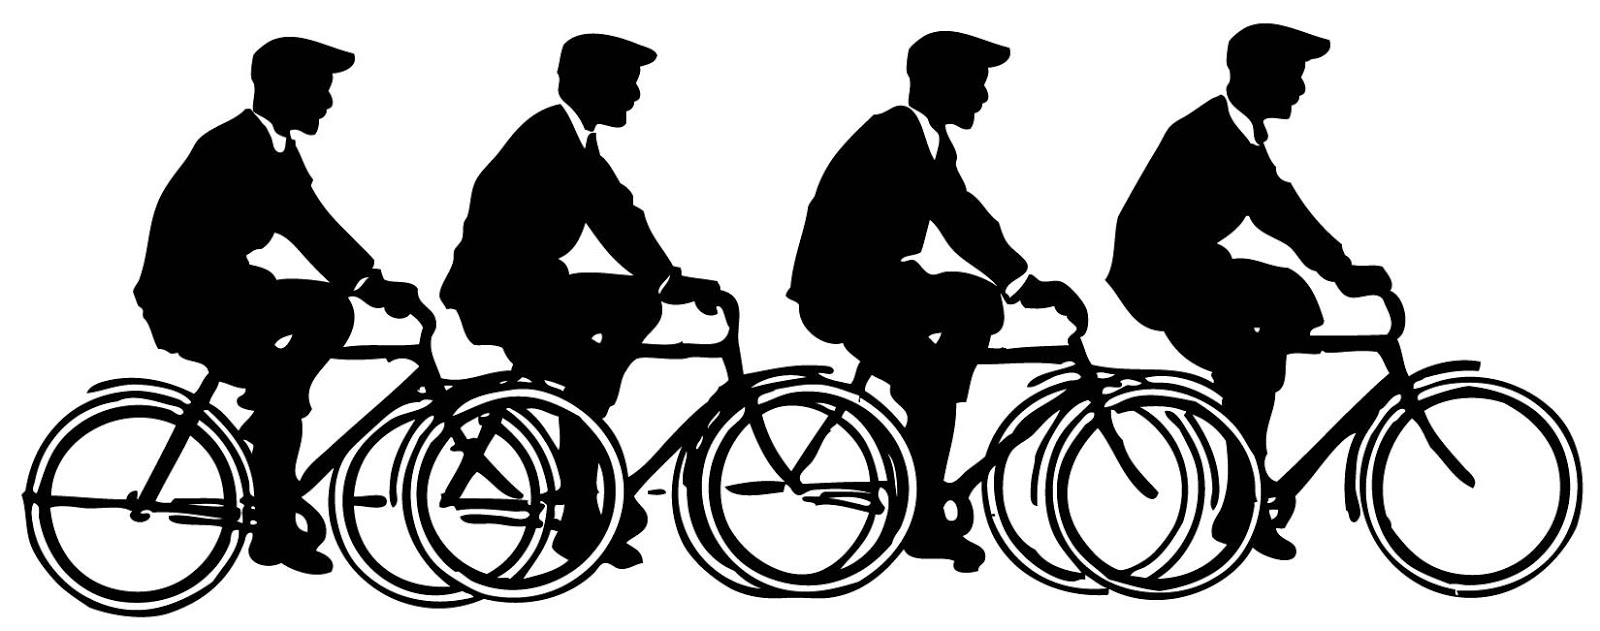 Vector Images - Vintage Men on Bicycles - Silhouette - The 